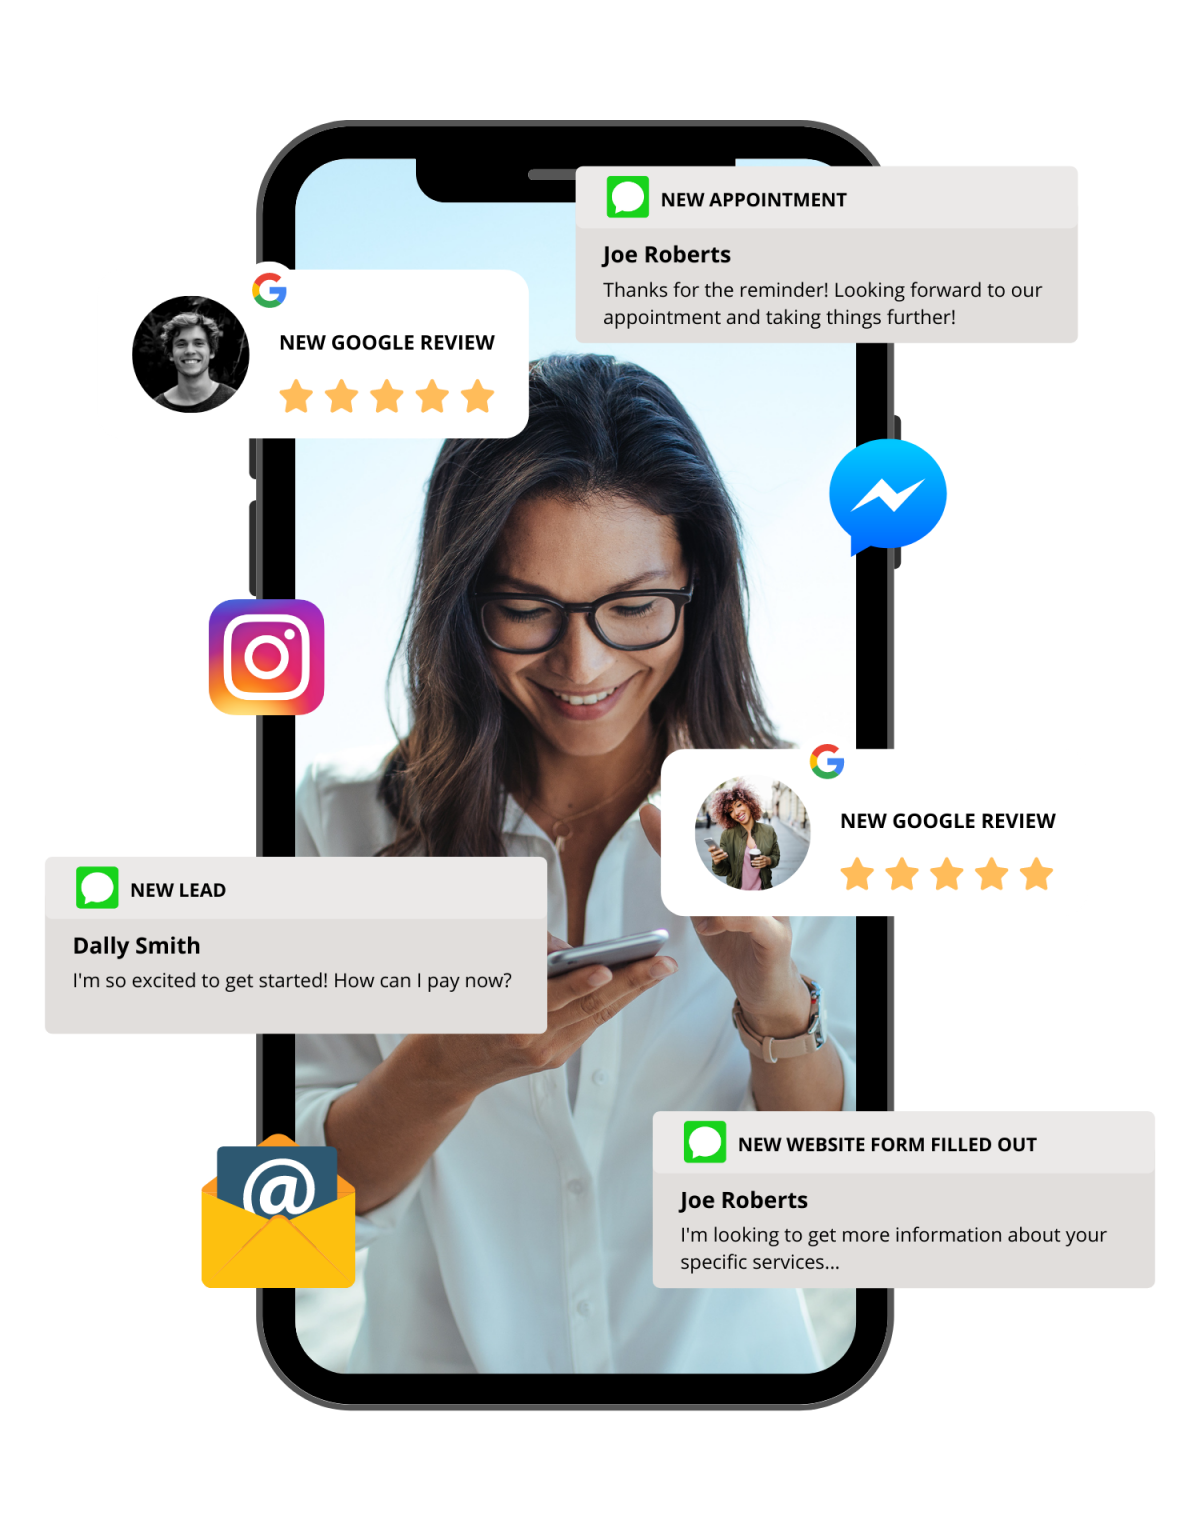 all in one toolkit mobile application showing social media notifications, leads, reviews and new appointment notifications